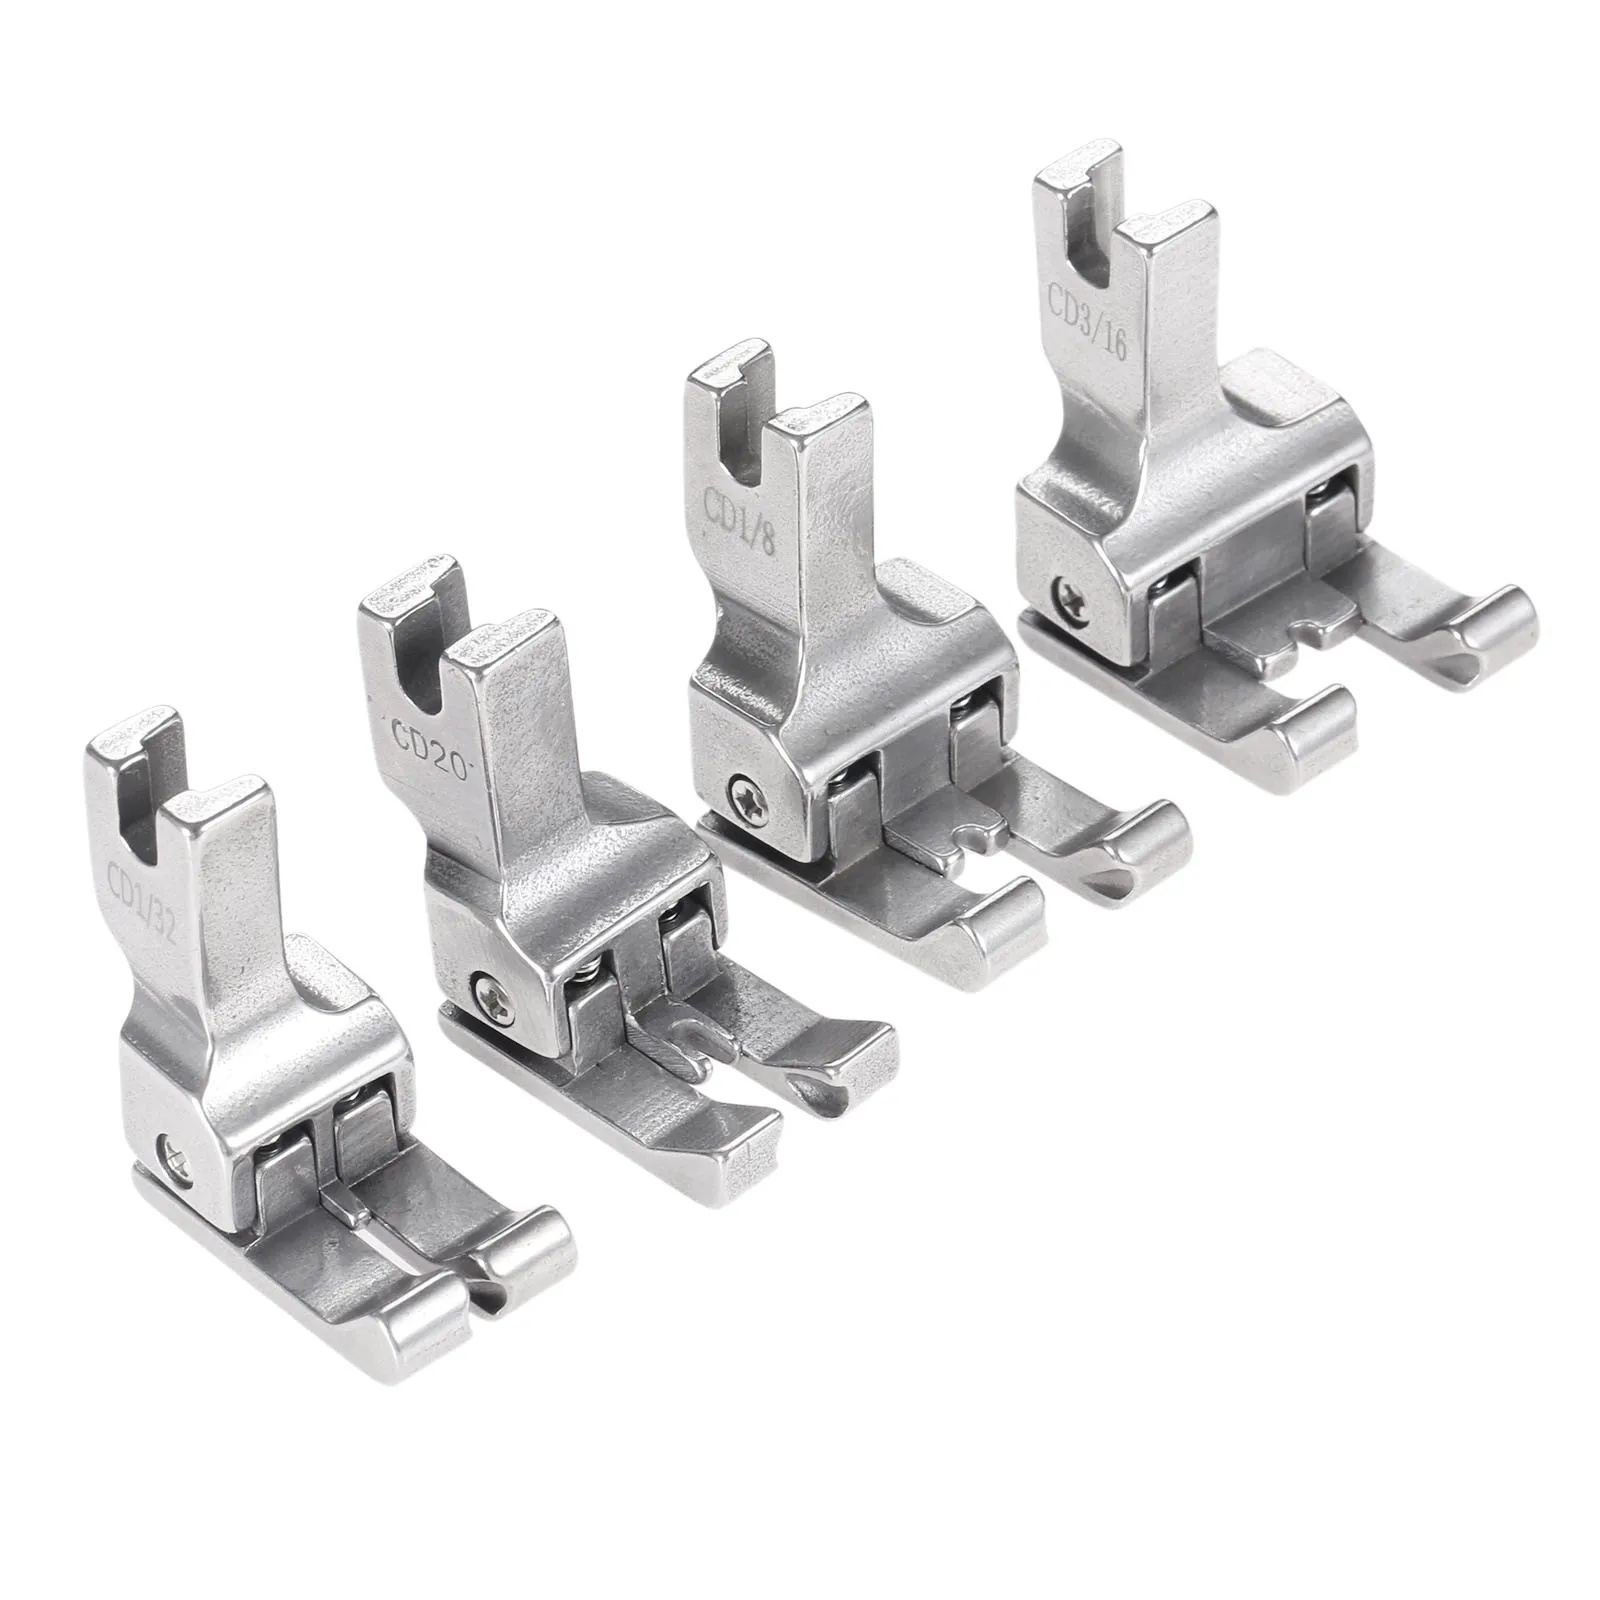 Double Compensating Presser Foot Industrial Sewing Machine Steel Right&Left top stitching CD1/32 CD1/16 CD1/8 CD3/16 Hicello